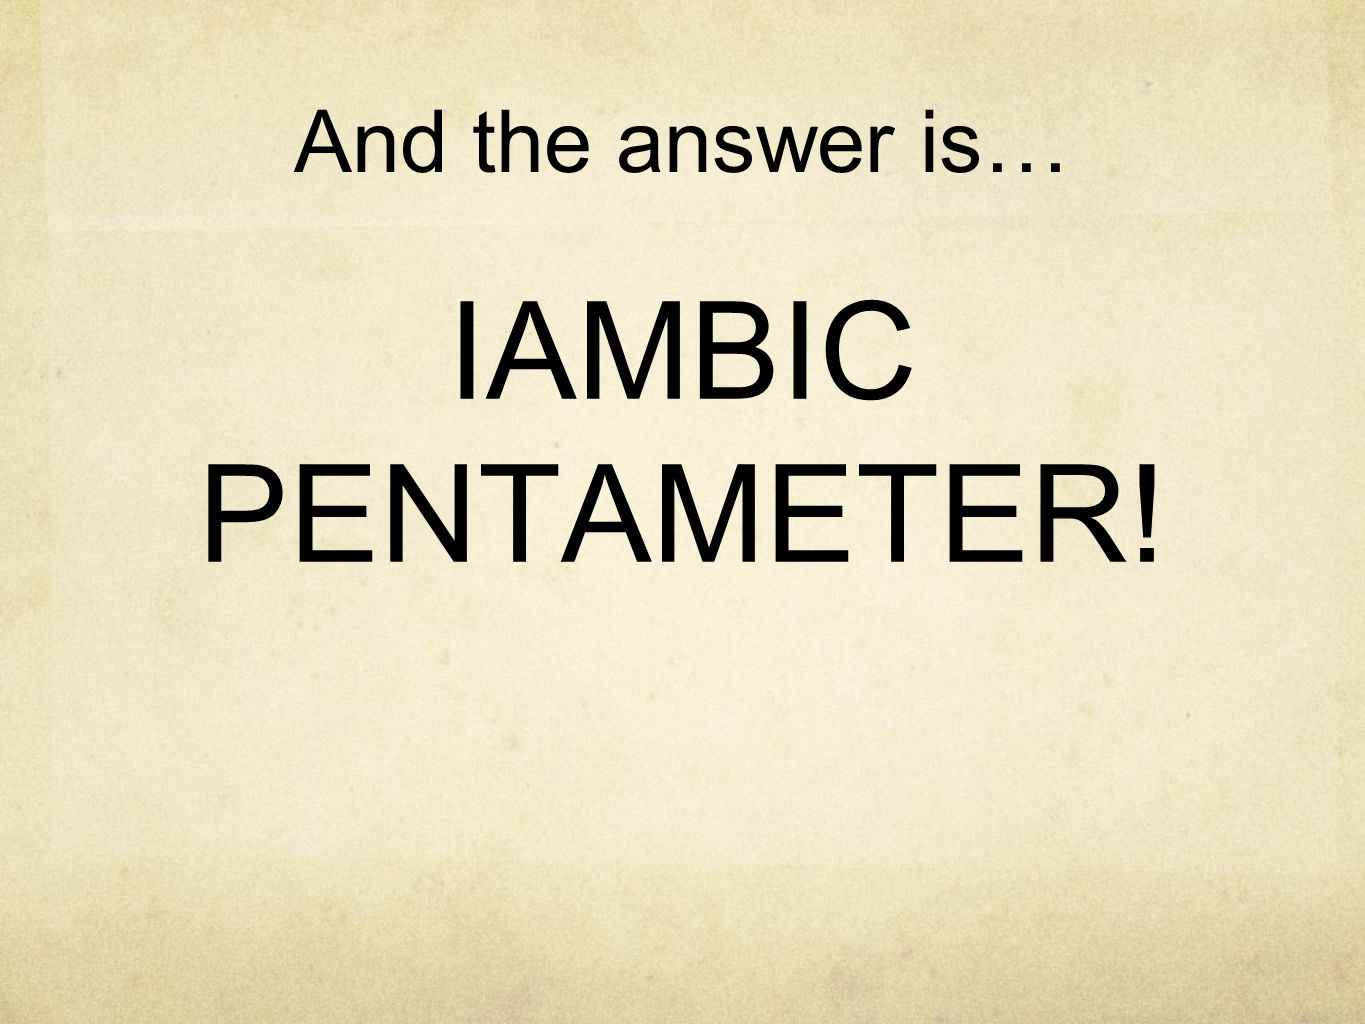 And the answer is… IAMBIC PENTAMETER!